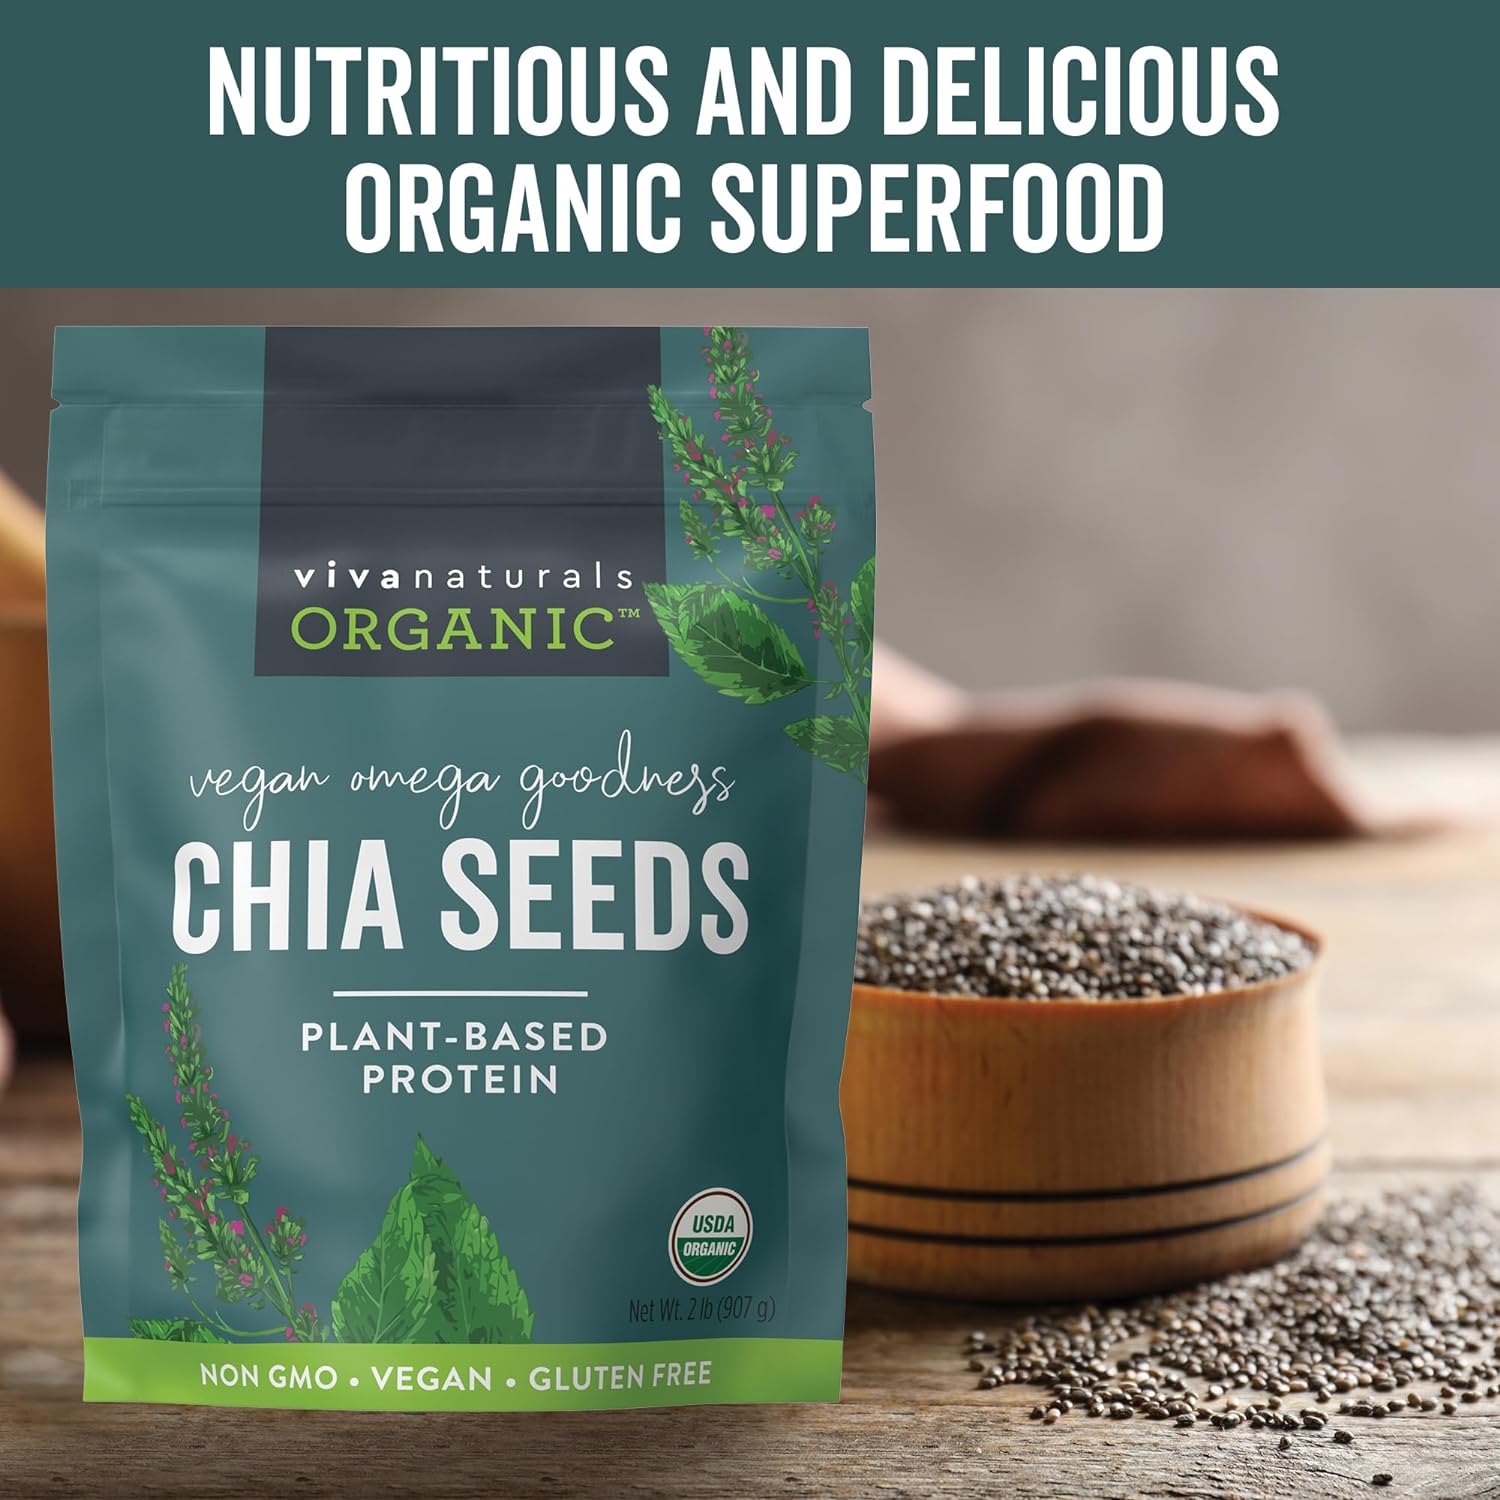 Viva Naturals Organic Chia Seeds - Plant-Based Omegas 3 and Vegan Protein, Perfect for Smoothies, Salads and Chia Puddings, Certified Non-GMO and USDA Organic, 2 lb (907 g)